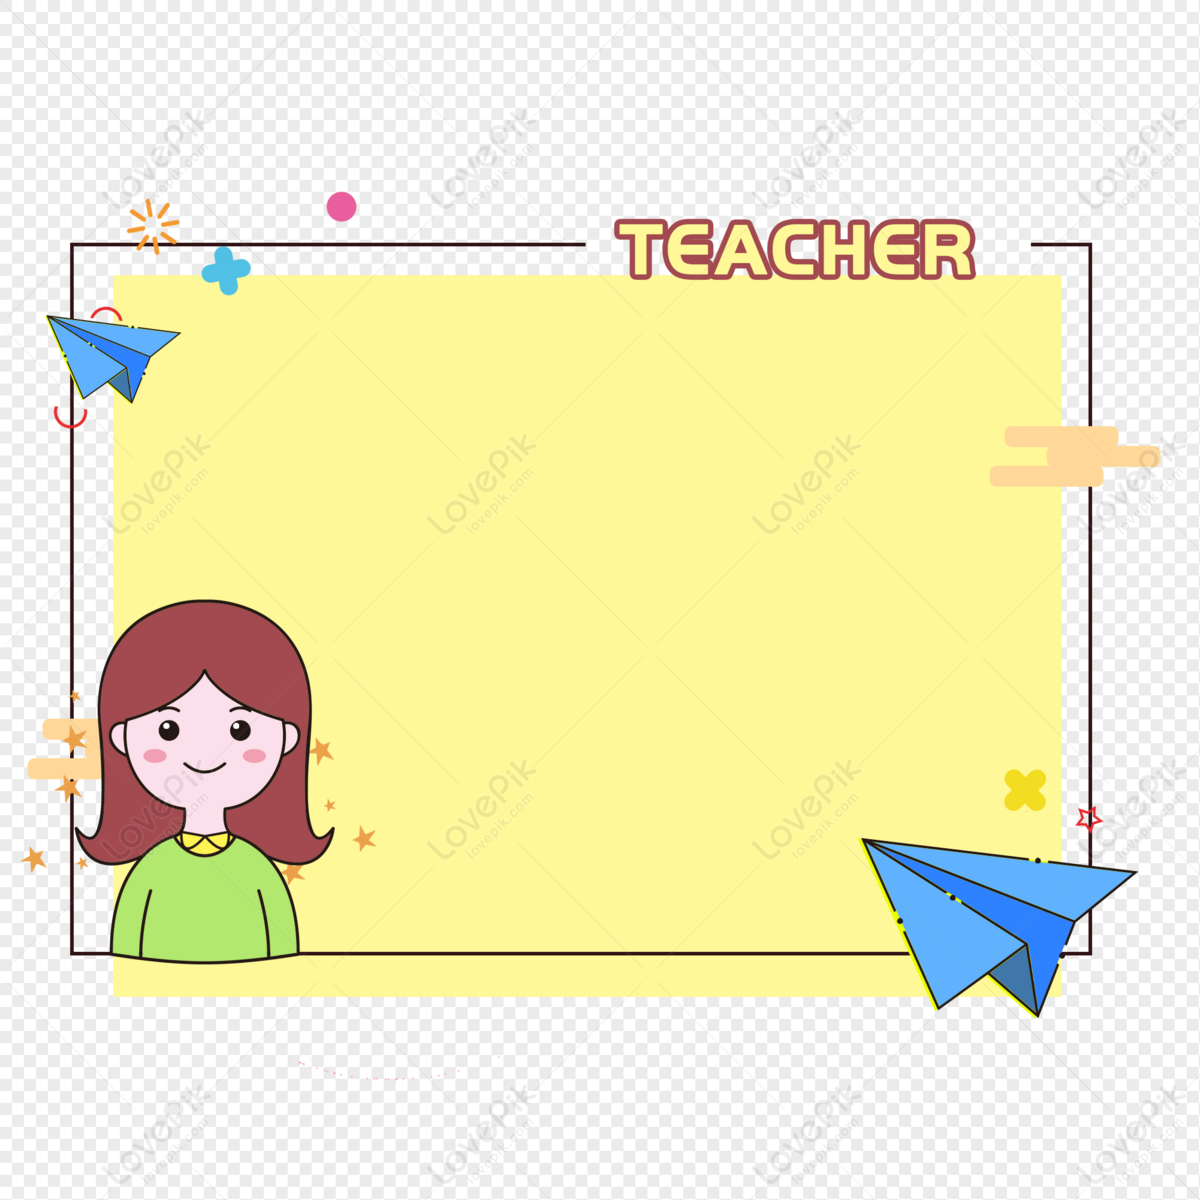 Teachers Day Cartoon Border PNG Image And Clipart Image For Free Download -  Lovepik | 401608748